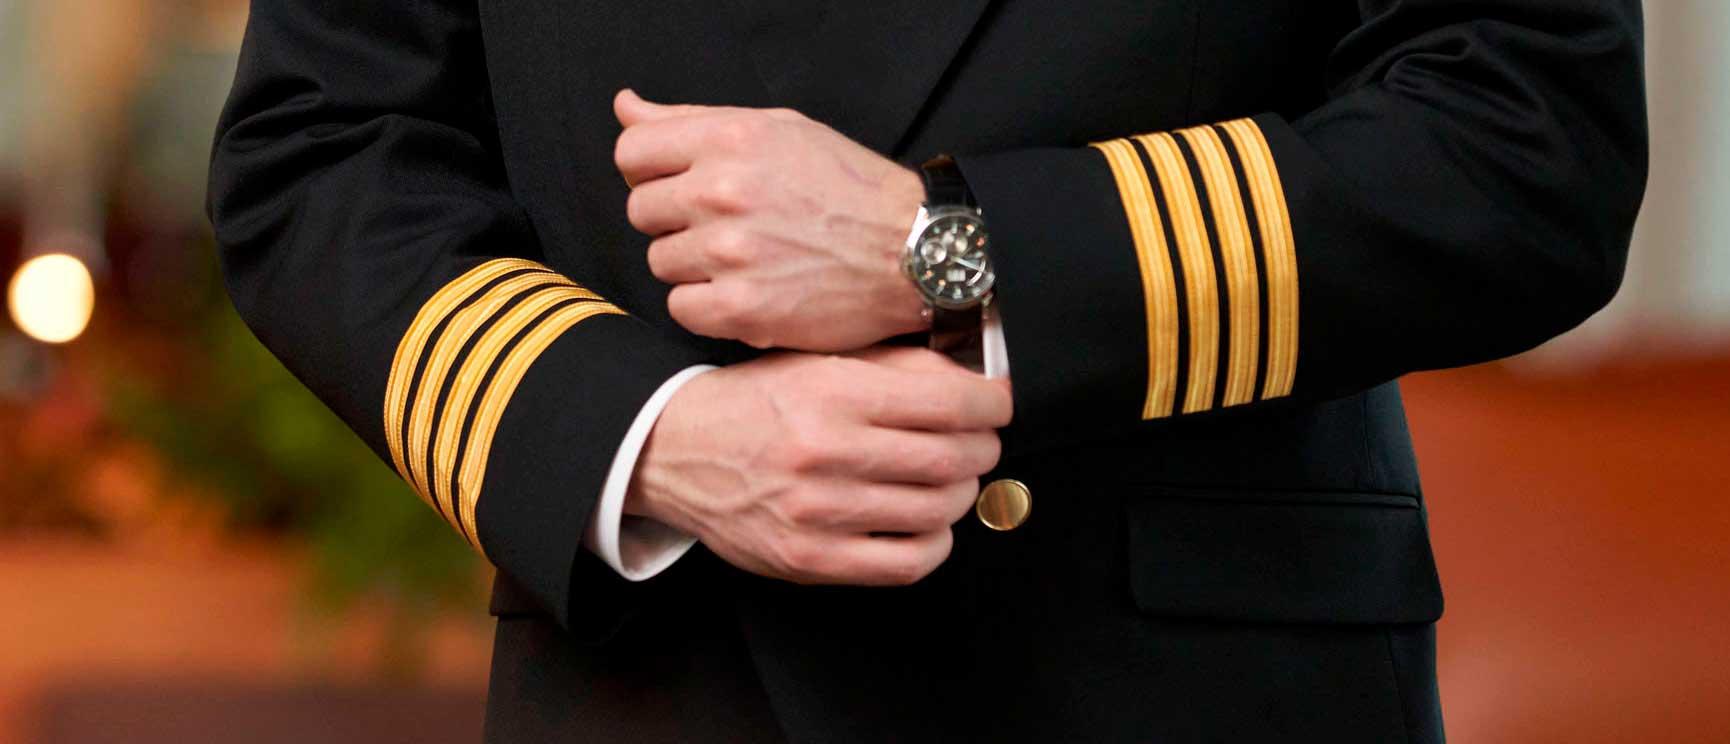 Ranking stripes on the sleeves of the pilot uniform jacket